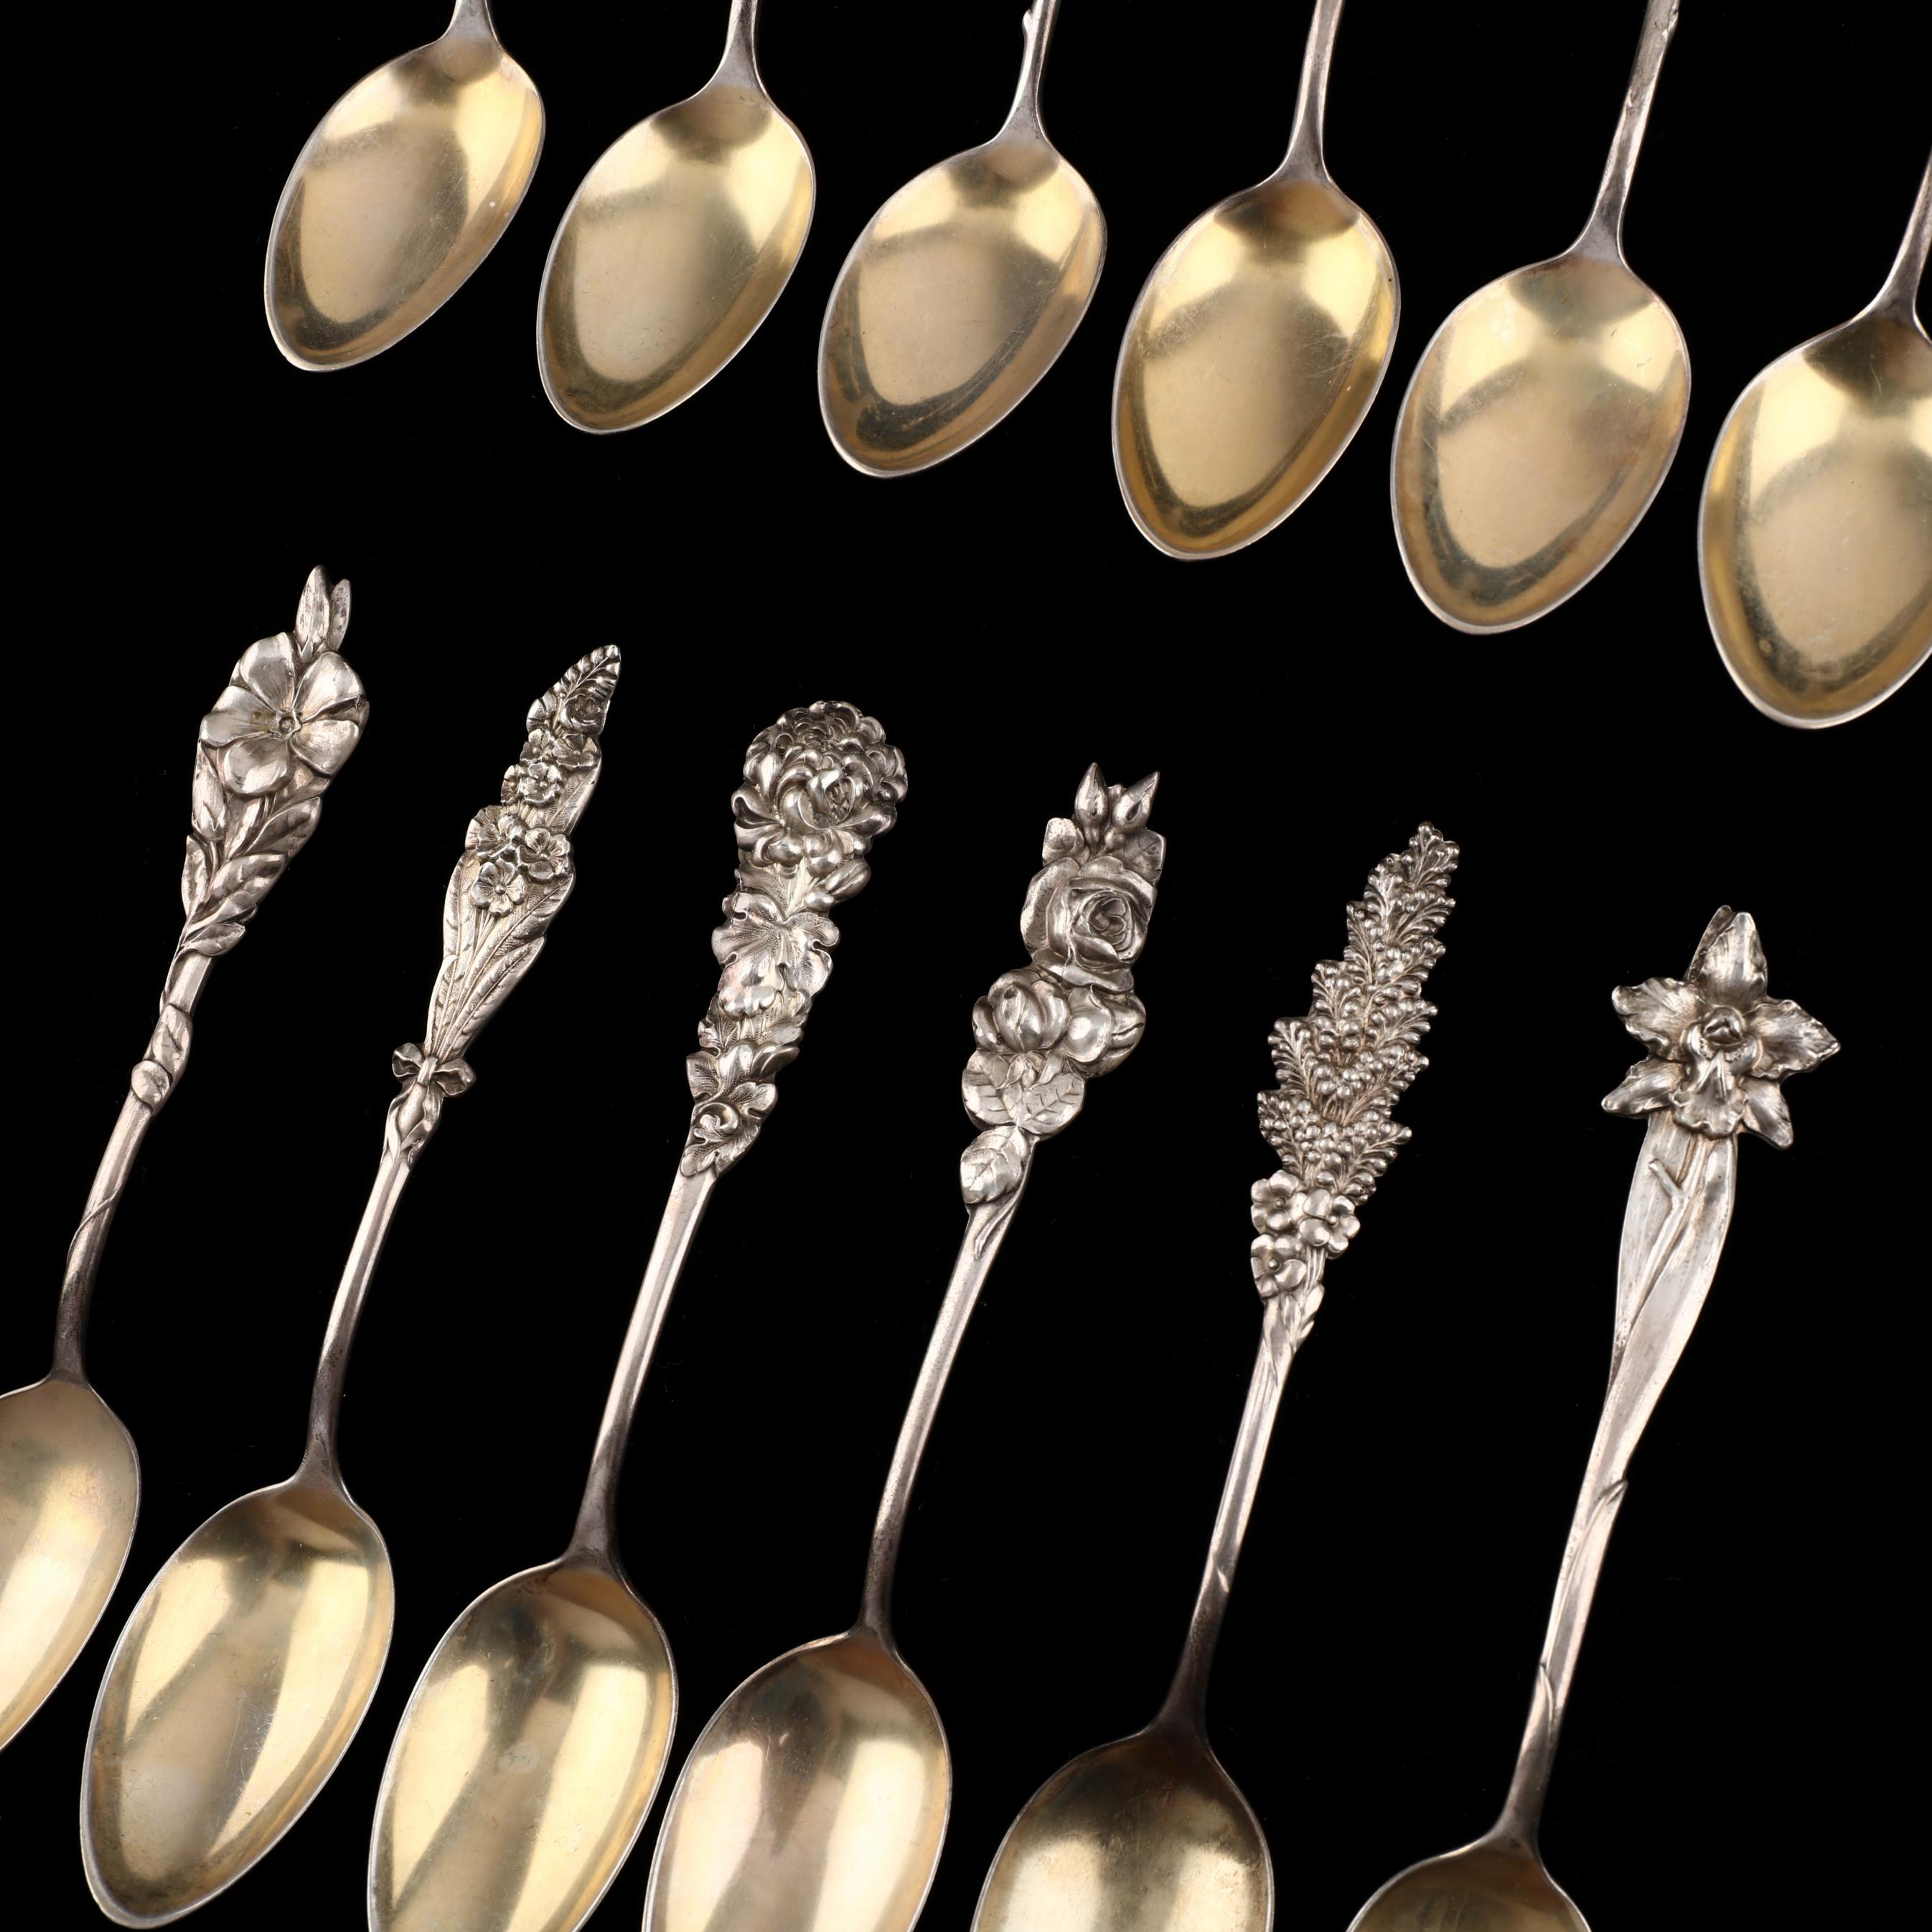 Wild Rose Reed & Barton Harlequin Spoon Jewelry Details about   Silver Spoon Ring 